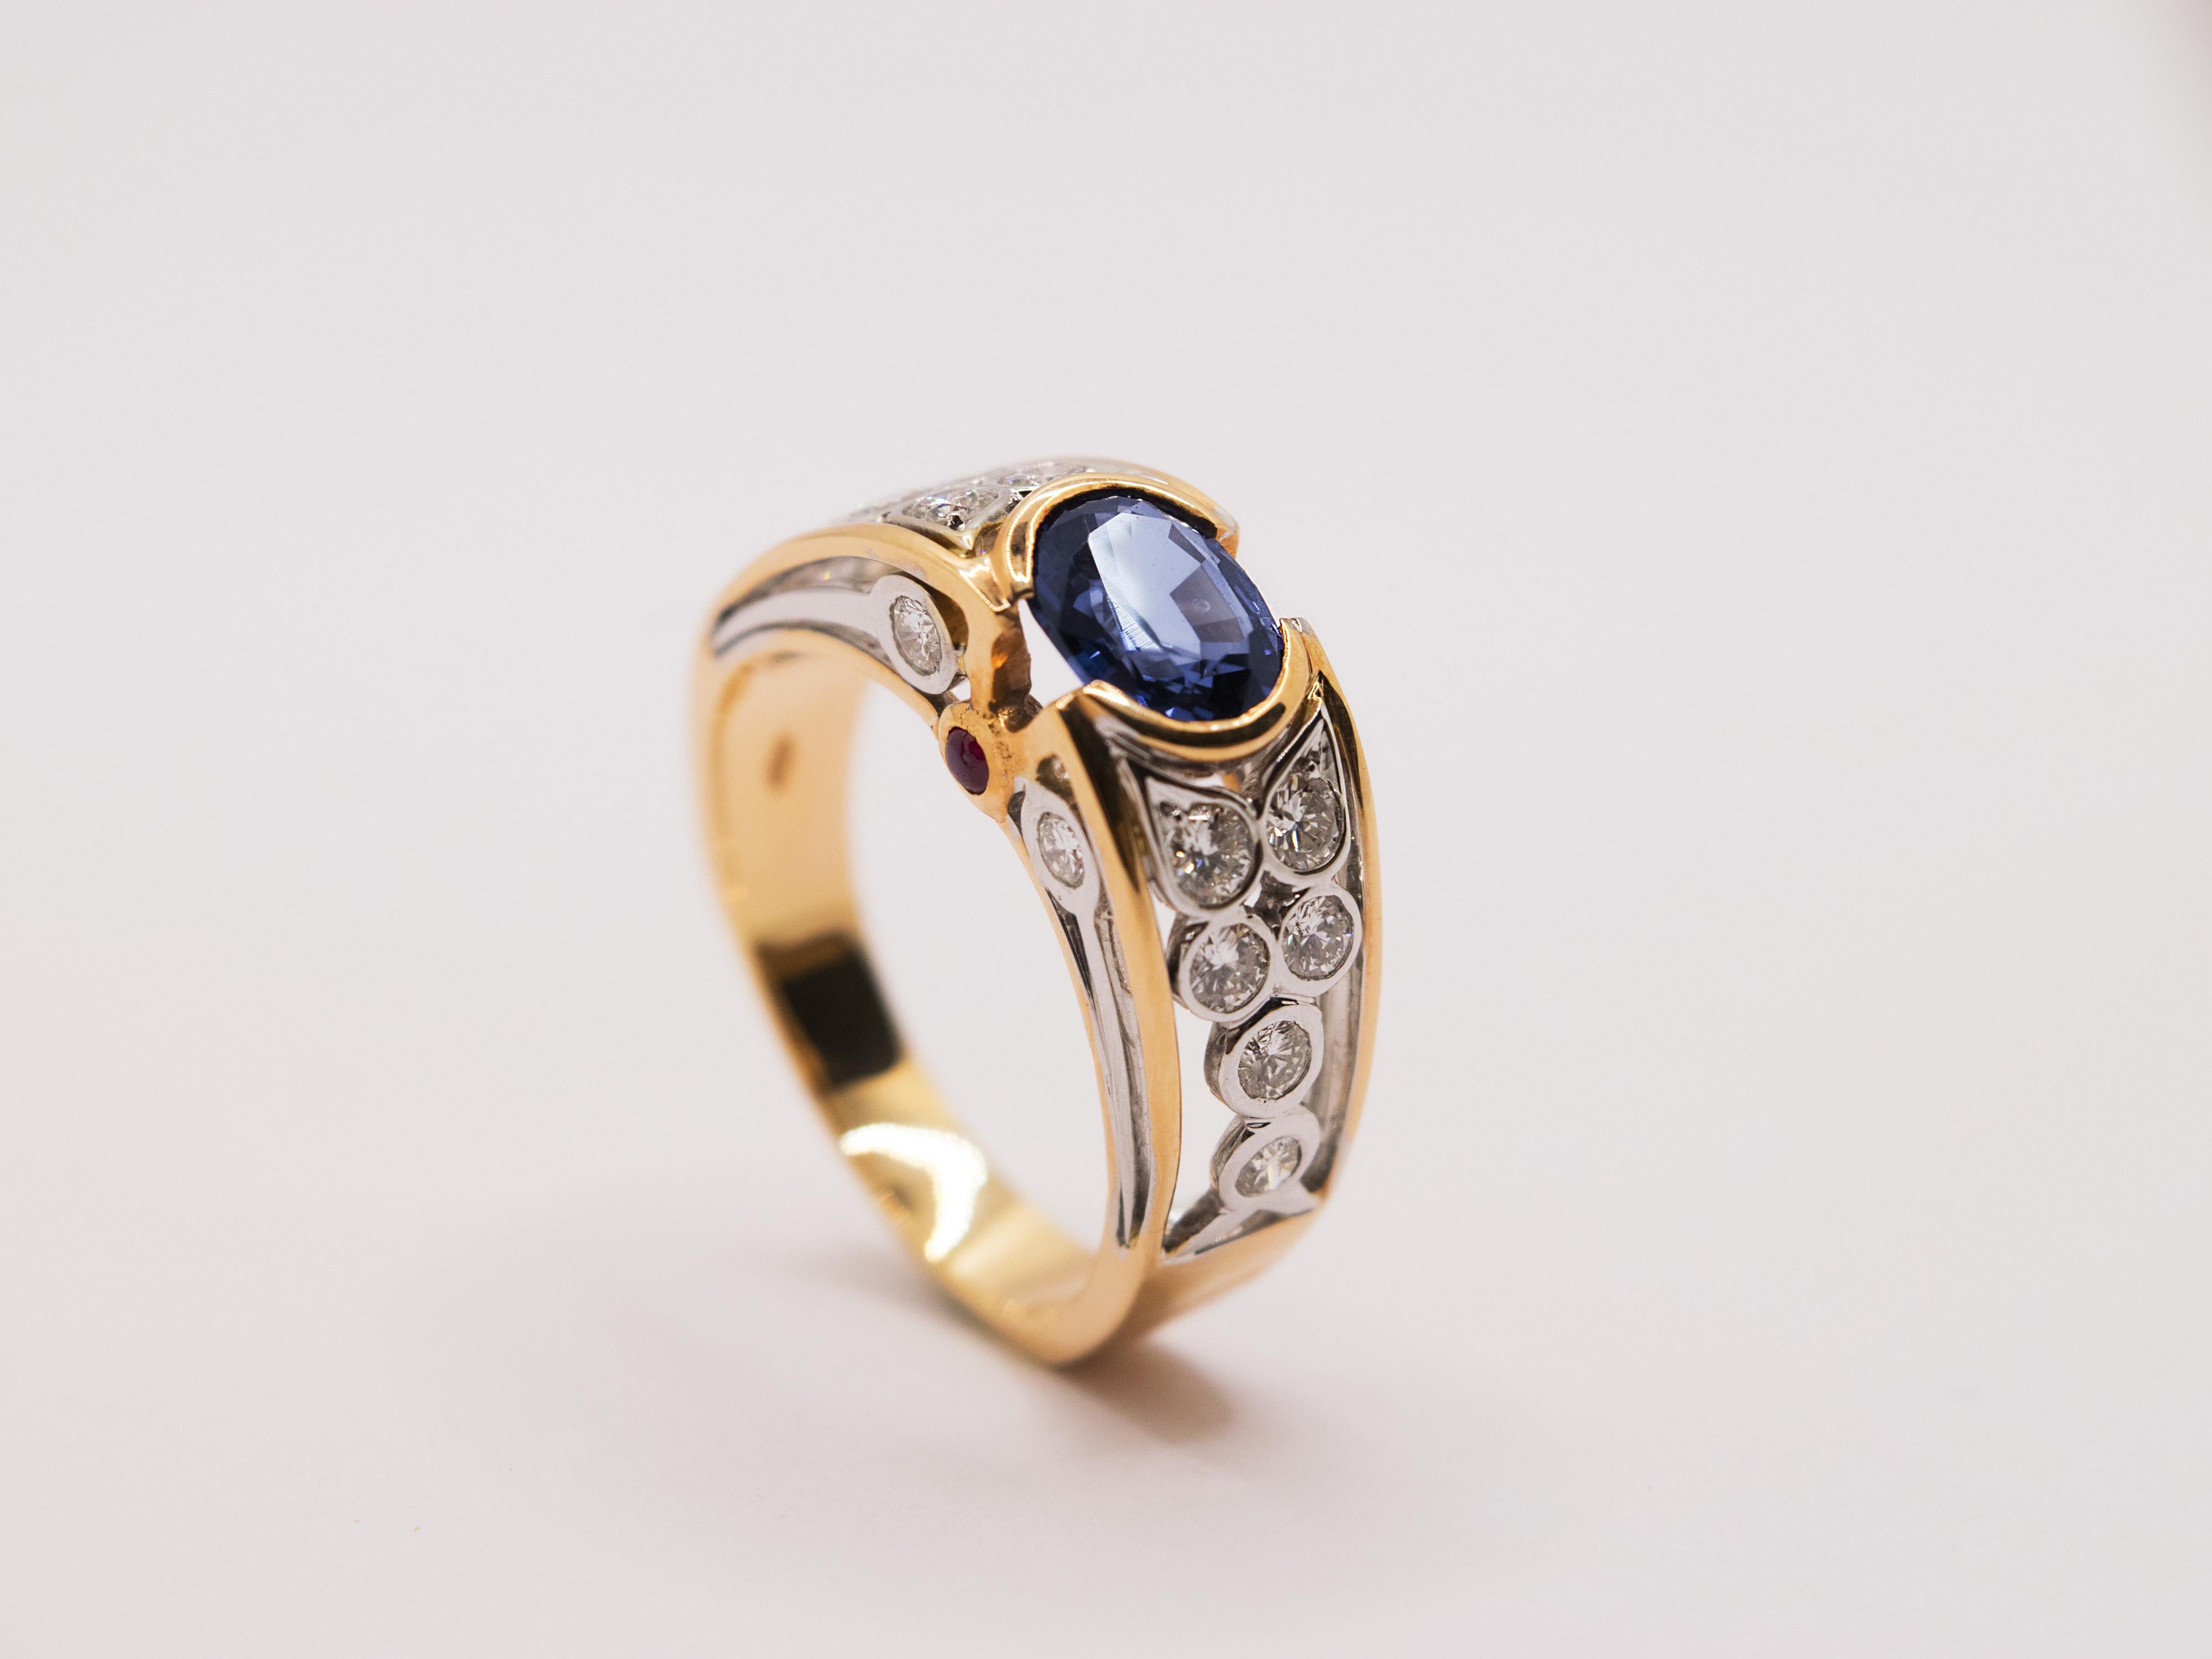 A beautiful band ring with a classic and elegant style.
This jewelry is handcrafted by Italian master goldsmiths in 18 kt gold ( gr 6.65 ).
Set in the center is a faceted oval-cut sapphire of a beautiful blue color and weighing Kt 1.20 .
Enriching